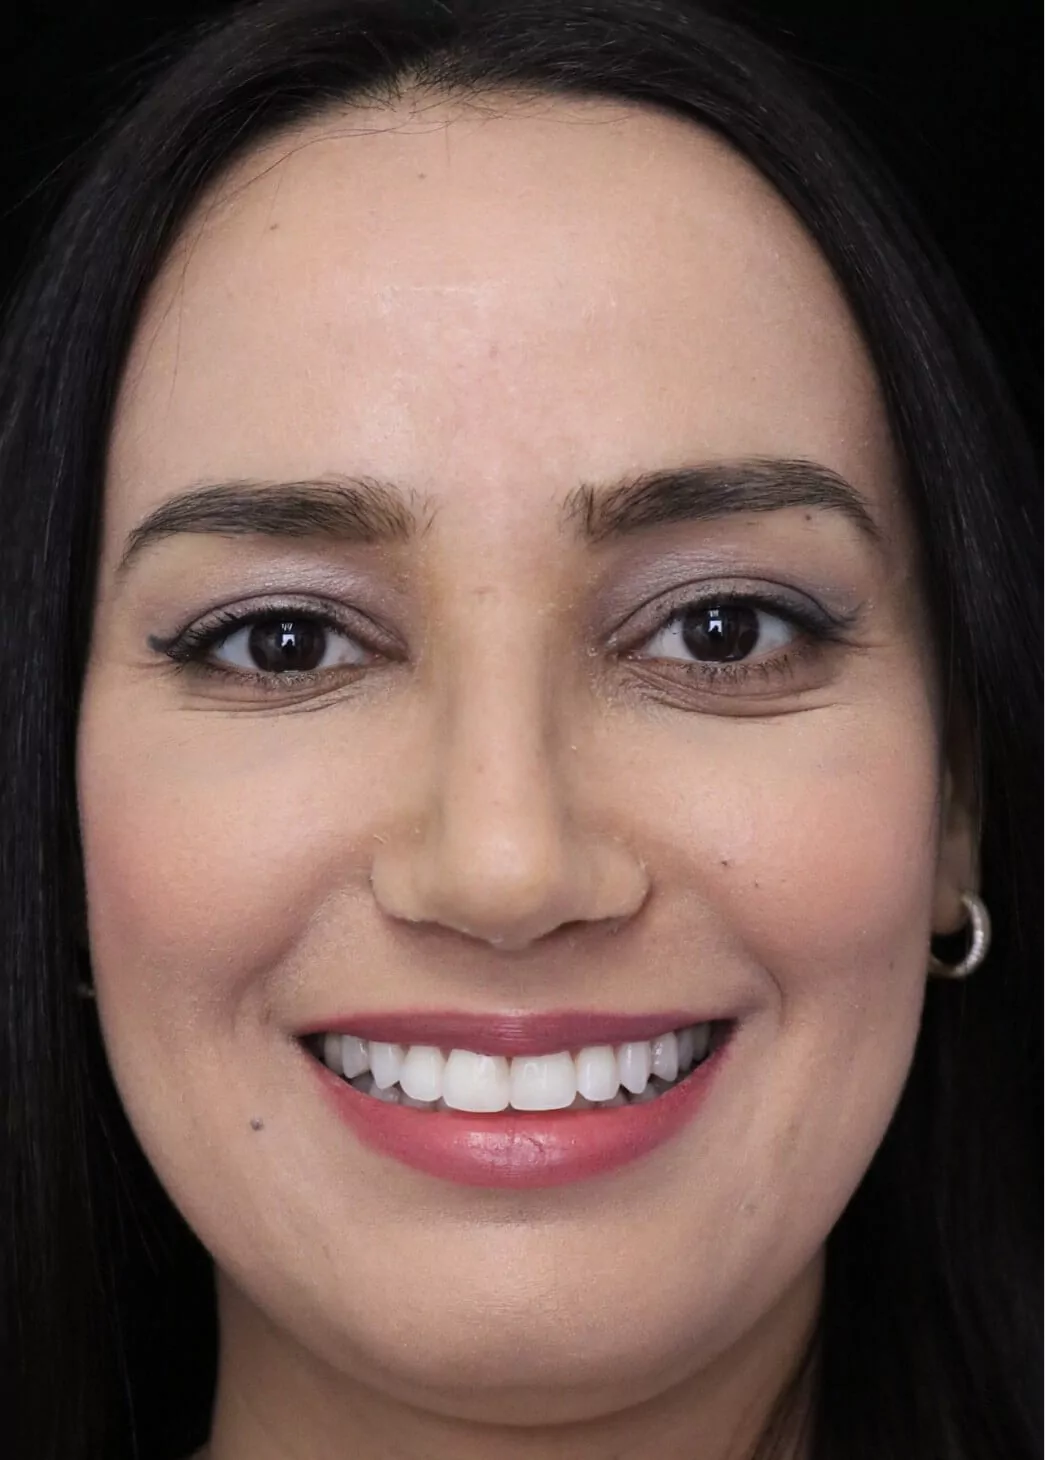 before and after photo on a frontal view of a smiling female middle eastern patient  who underwent non-surgical rhinoplasty